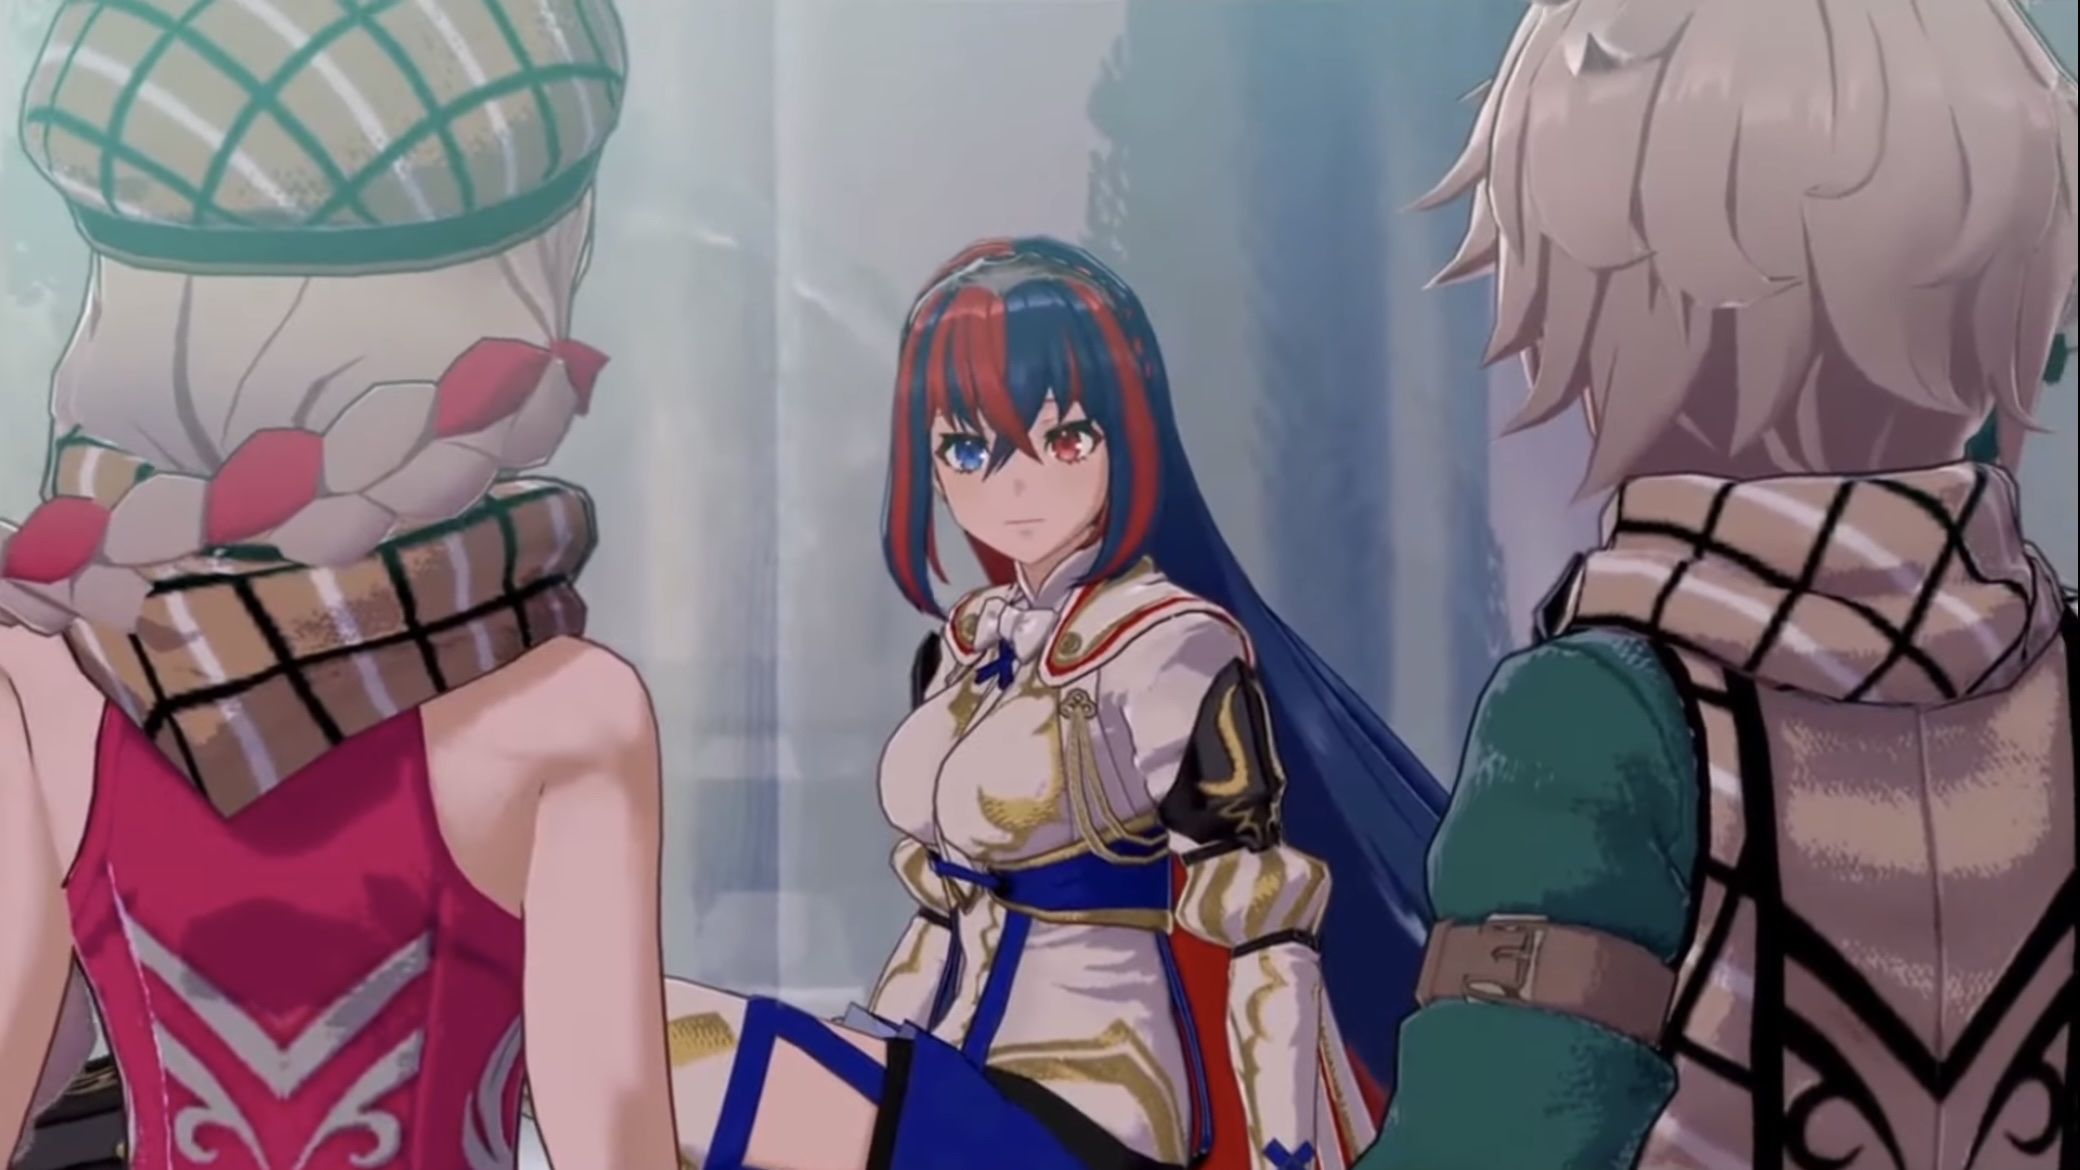 The female protagonist of Fire Emblem Engage is talked about as a mess wwwwwwwww 3